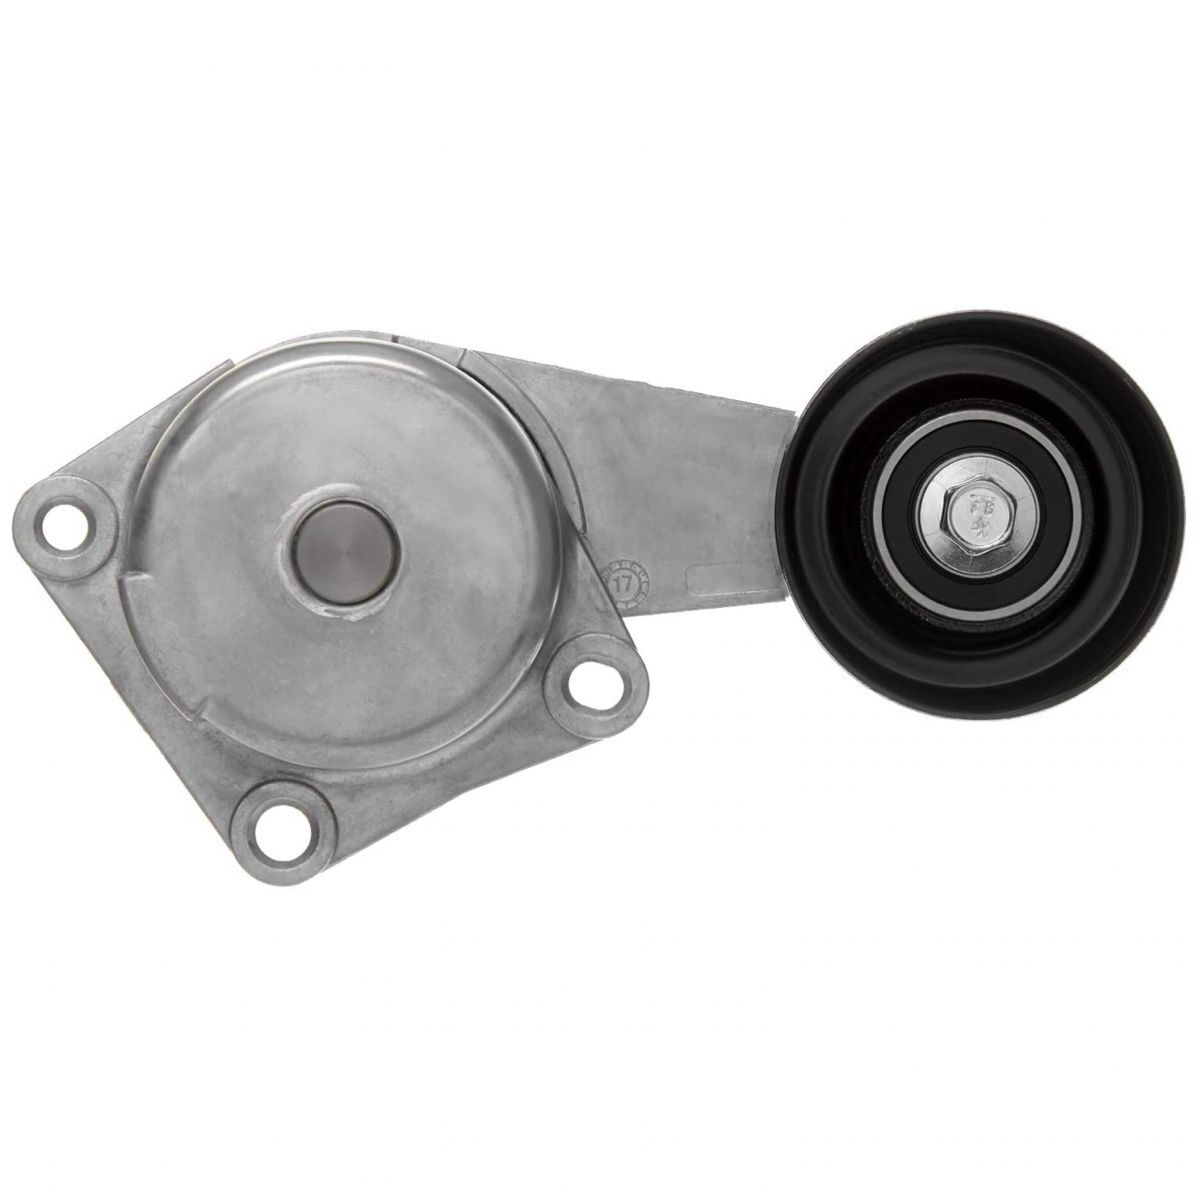  tax included ACDelco AC Delco Professional fan belt tensioner auto tensioner 05-10y Mustang prompt decision immediate payment stock goods 